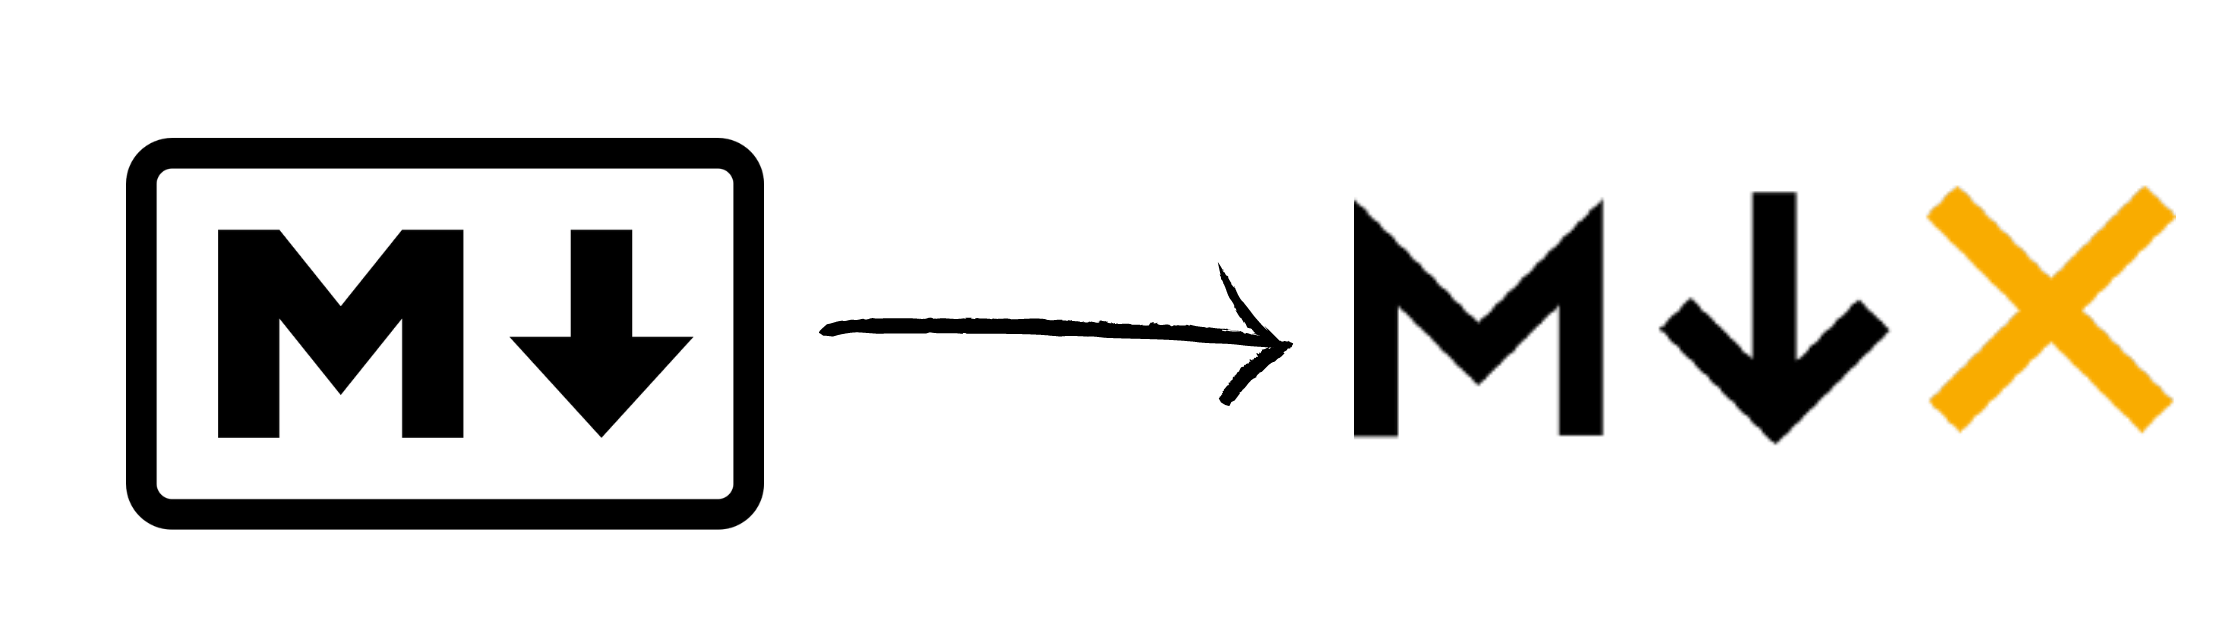 Arrow pointing from Markdown logo to MDX log